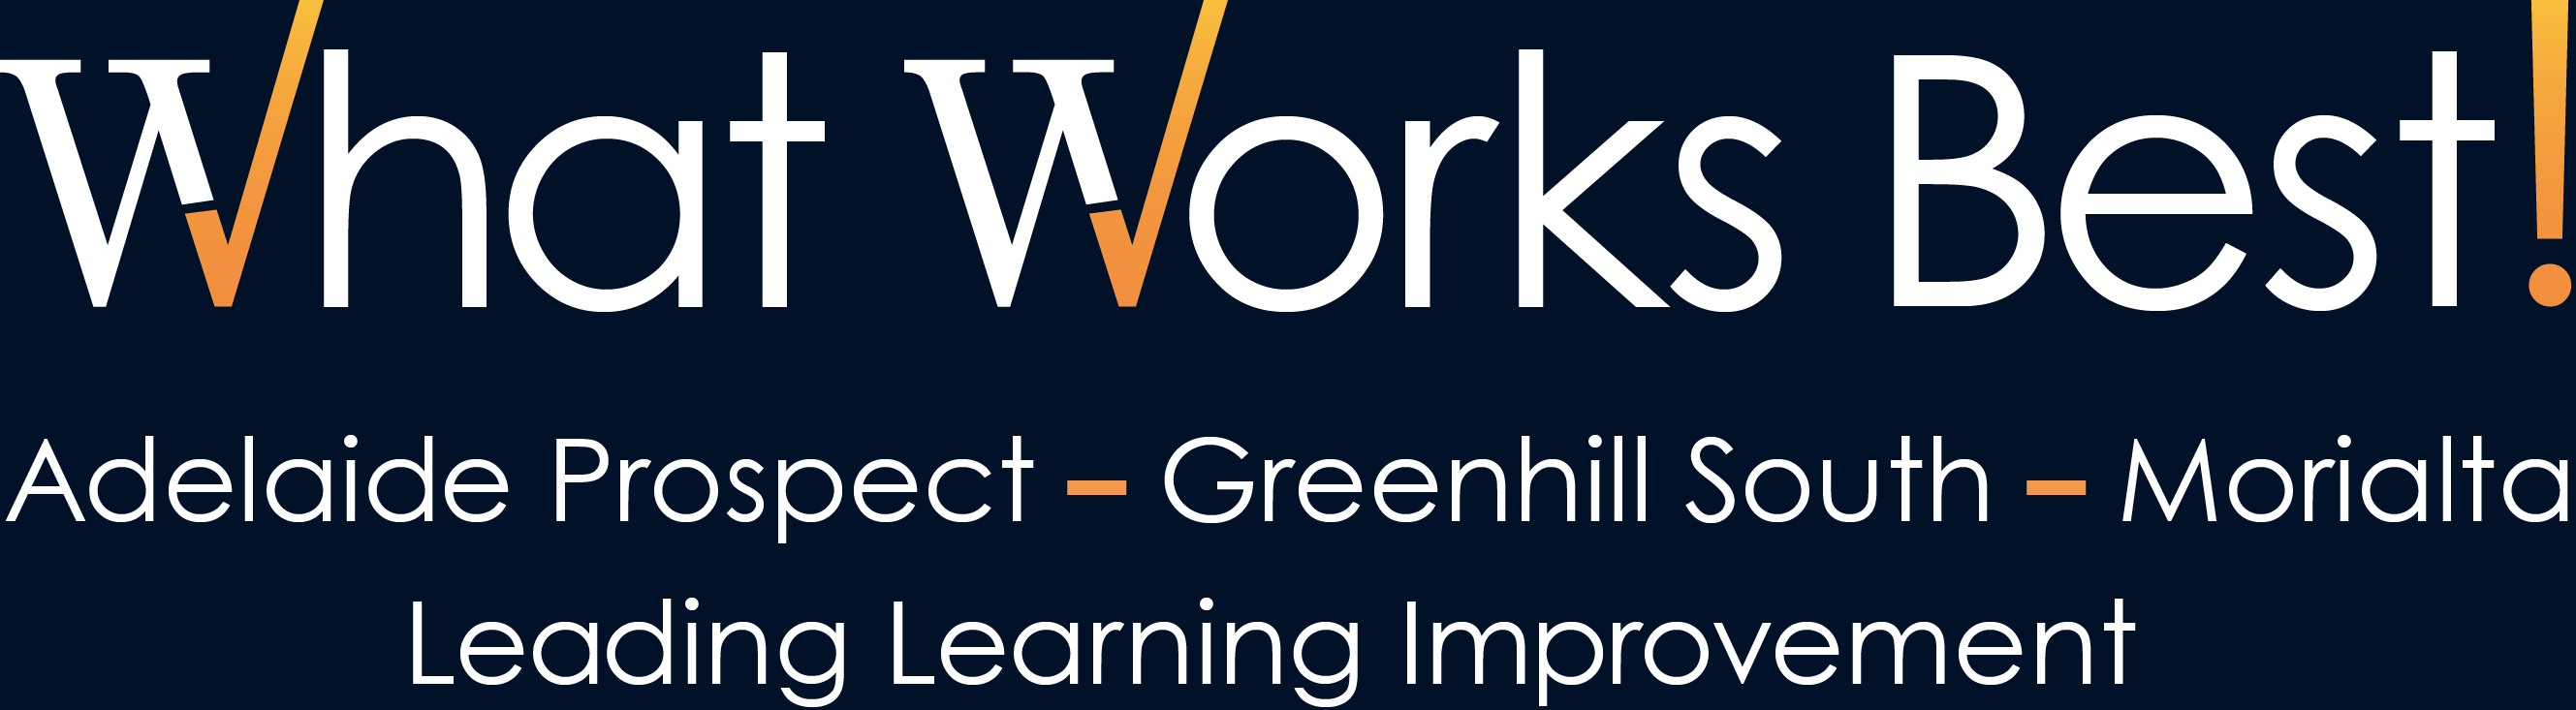 What Works Best! (title), Adelaide Prospect - Greenhill South - Morialta, Leading Learning Improvement (sub-title)